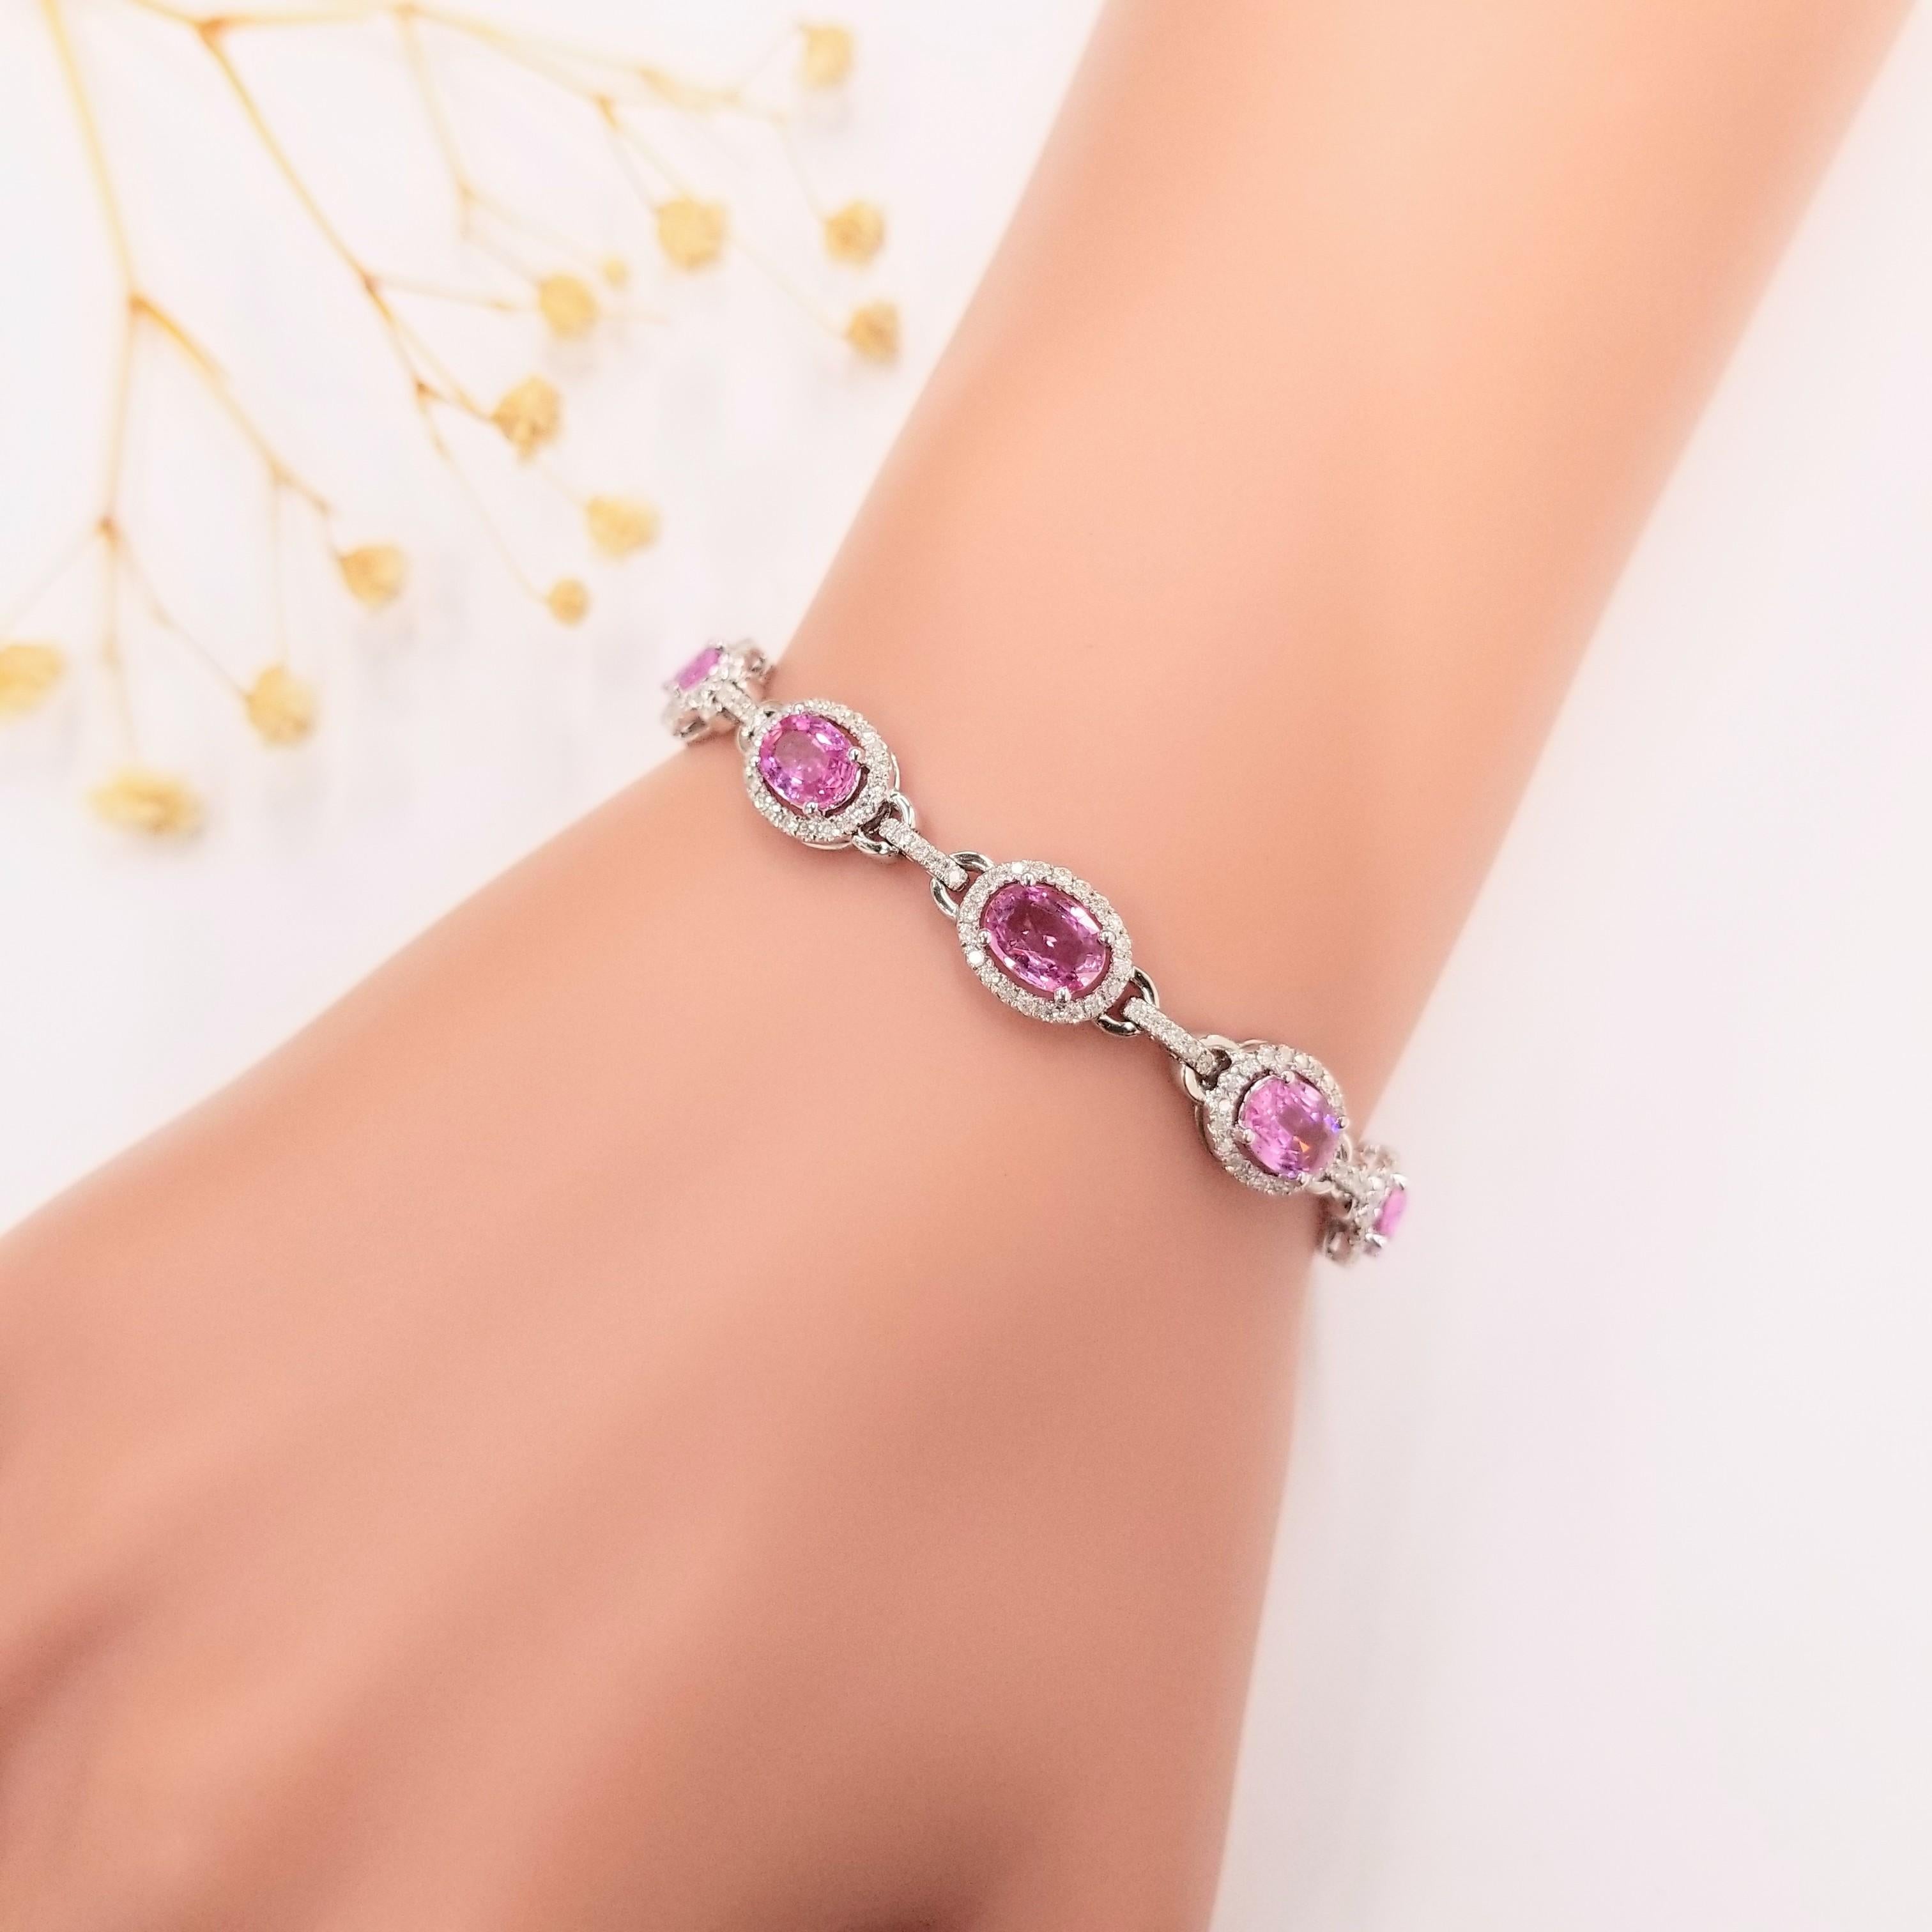 Introducing the enchanting IGI Certified 4.24Ct Pink Sapphire & Diamond Bracelet in 18K Gold. This exquisite bracelet features oval-shaped pink sapphires, showcasing a captivating intense purplish pink color. Each pink sapphire, weighing